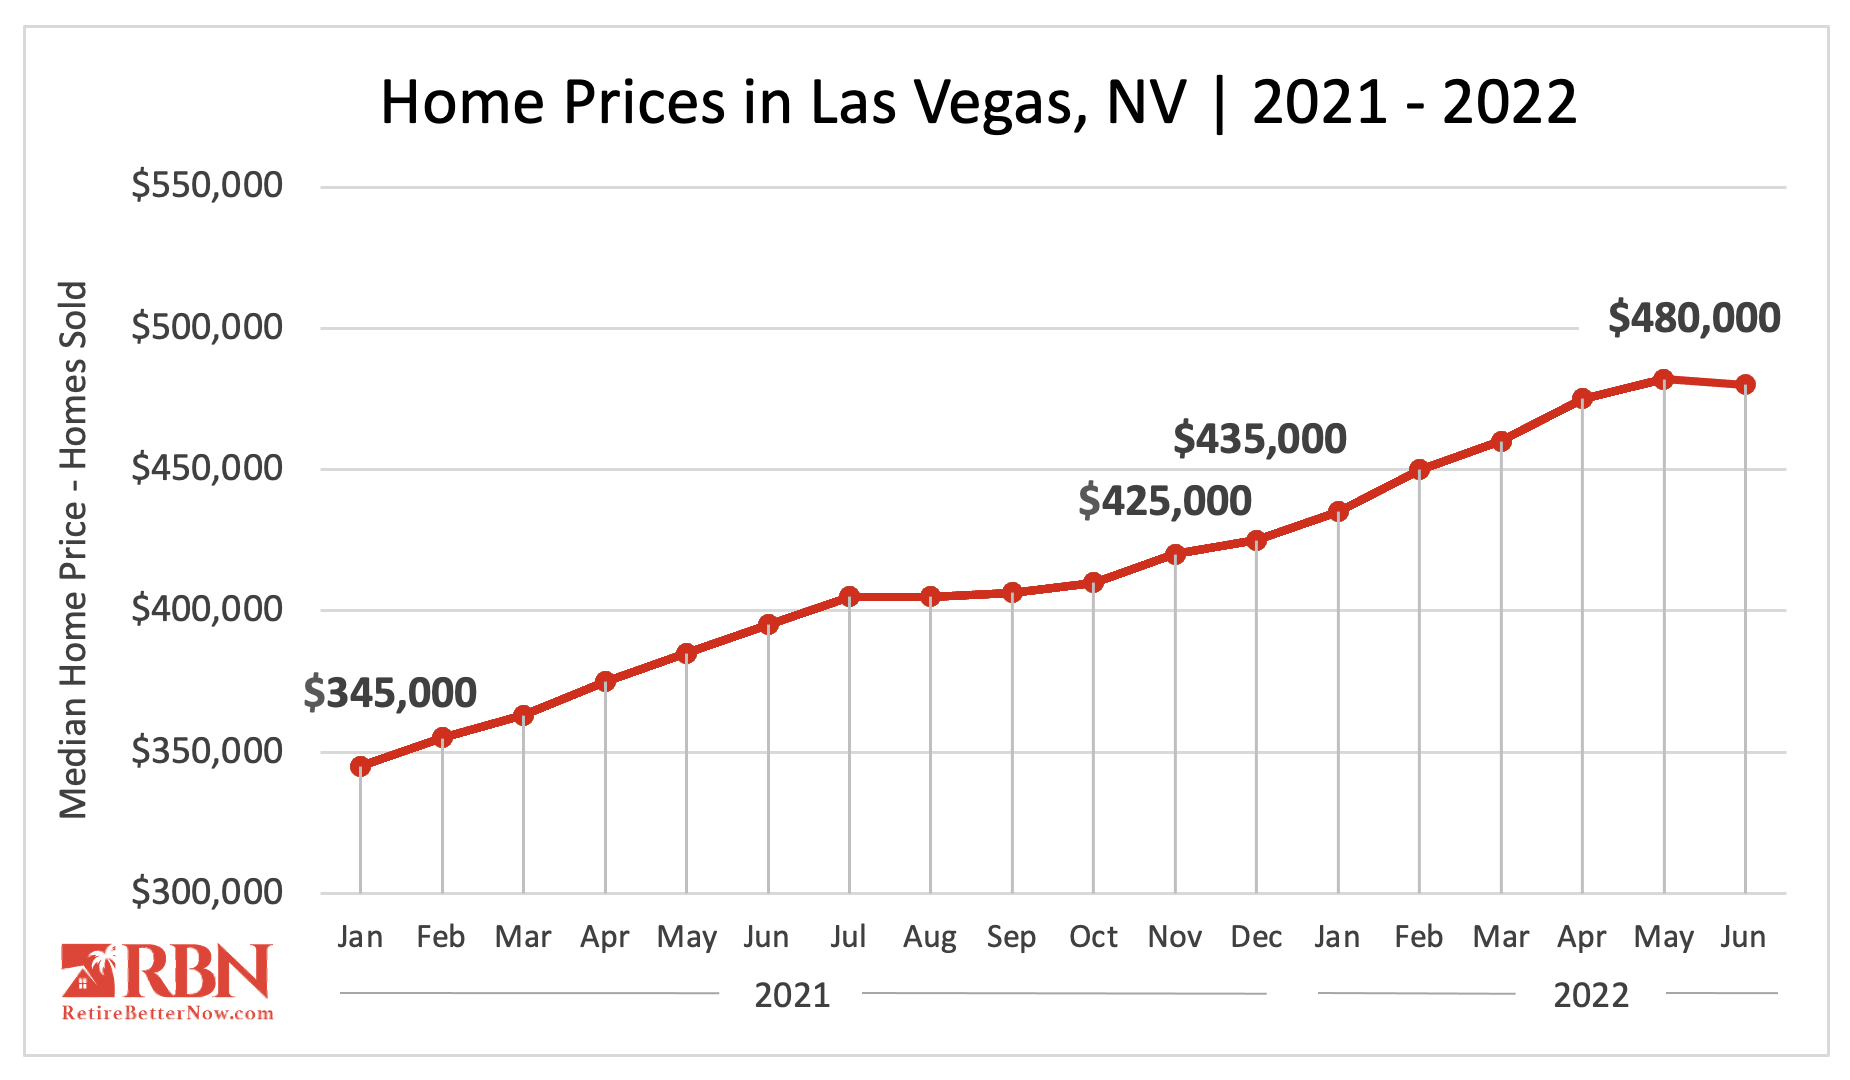 Are Home Prices Dropping in Las Vegas?